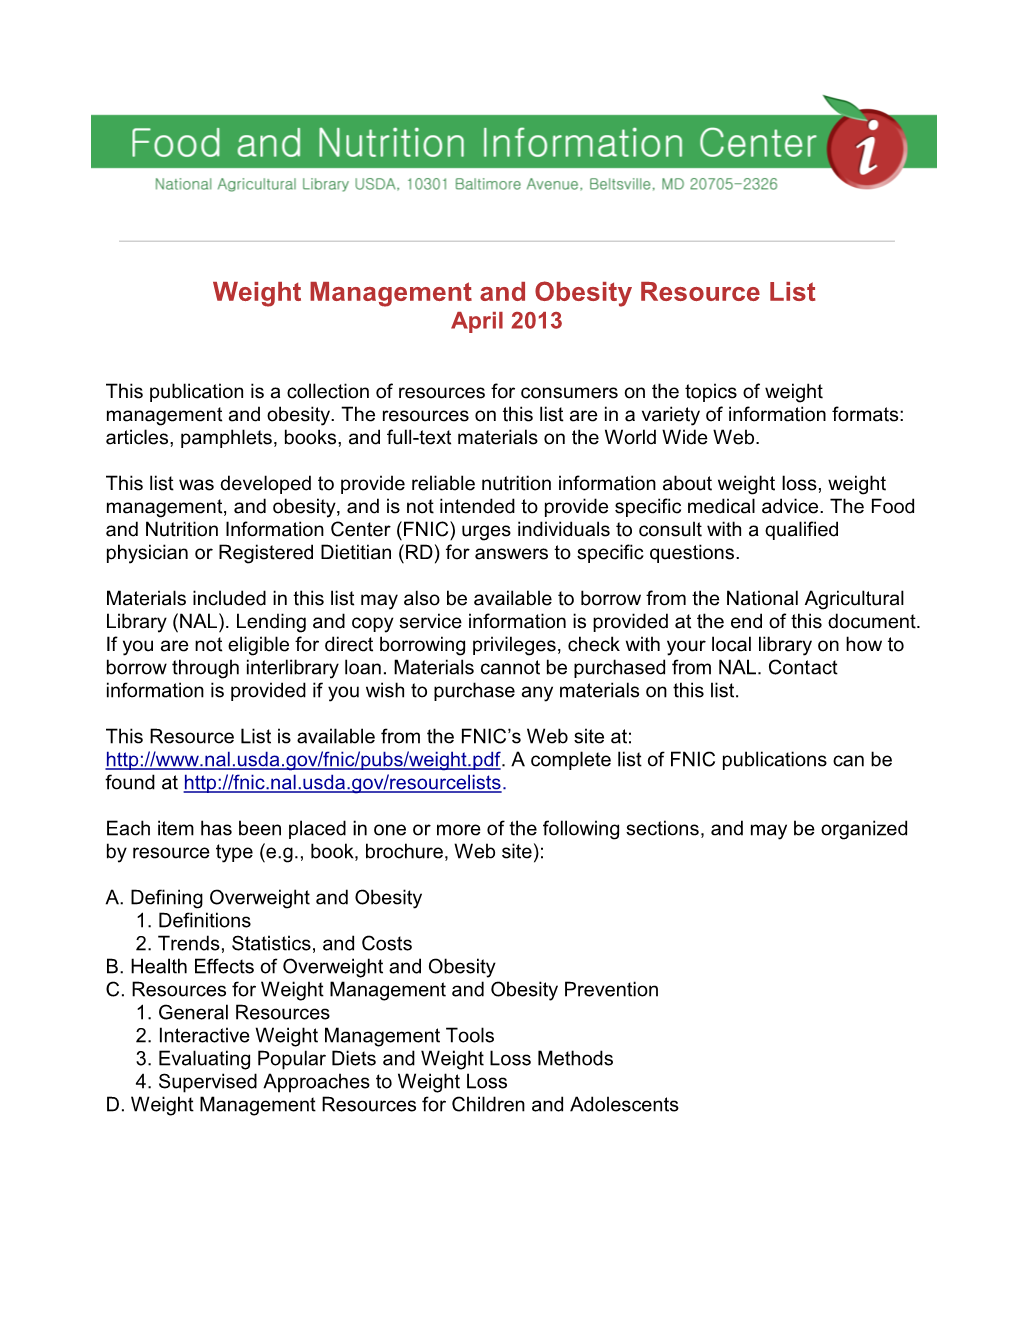 Weight Management and Obesity Resource List April 2013